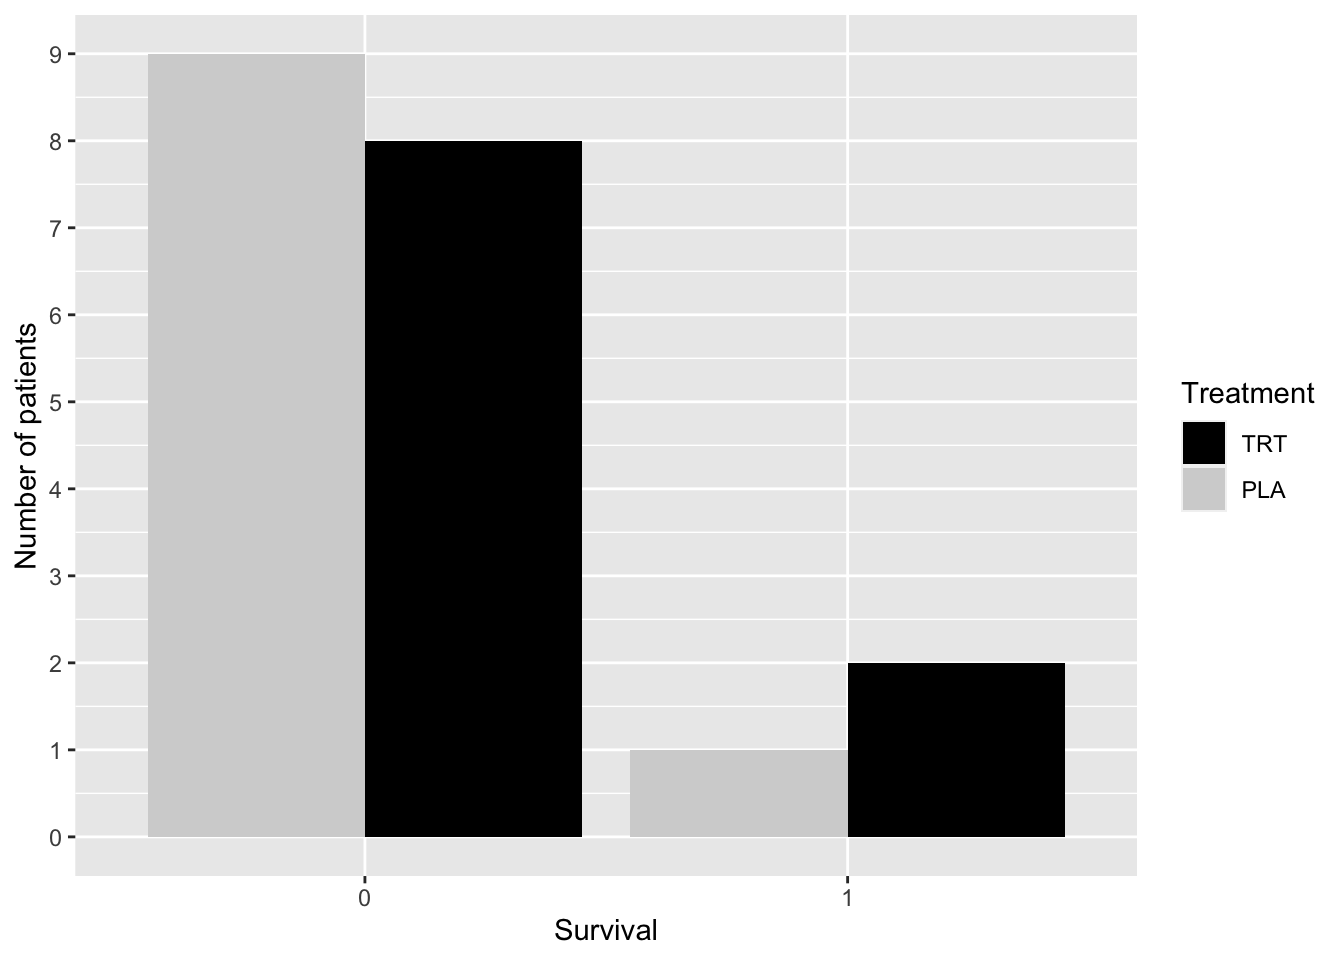 Distribution of Survival by Group---COVID-19 Study